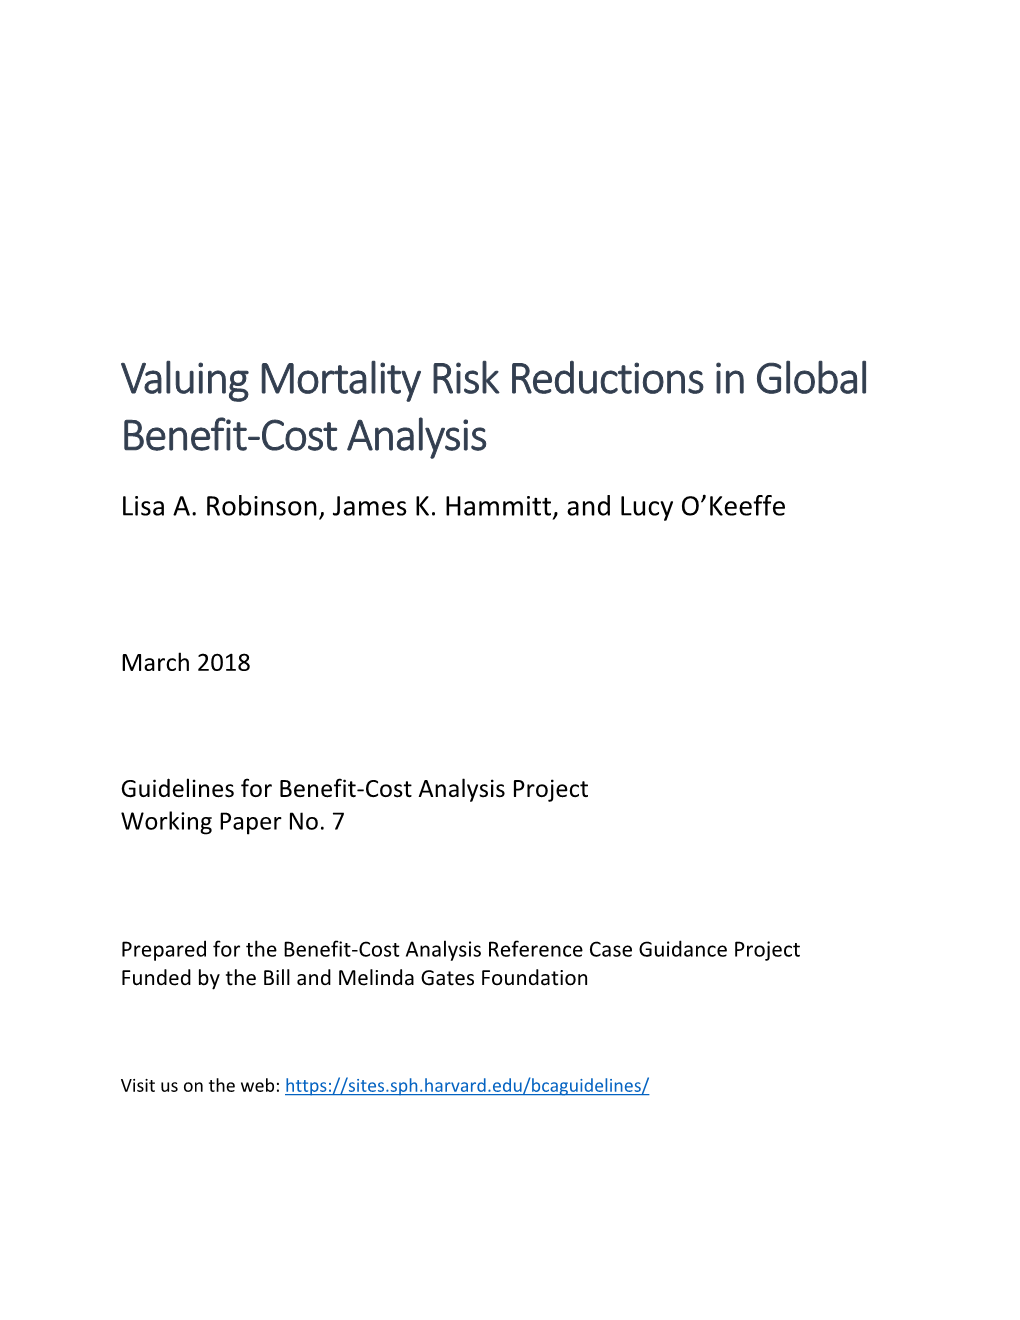 Valuing Mortality Risk Reductions in Global Benefit‐Cost Analysis